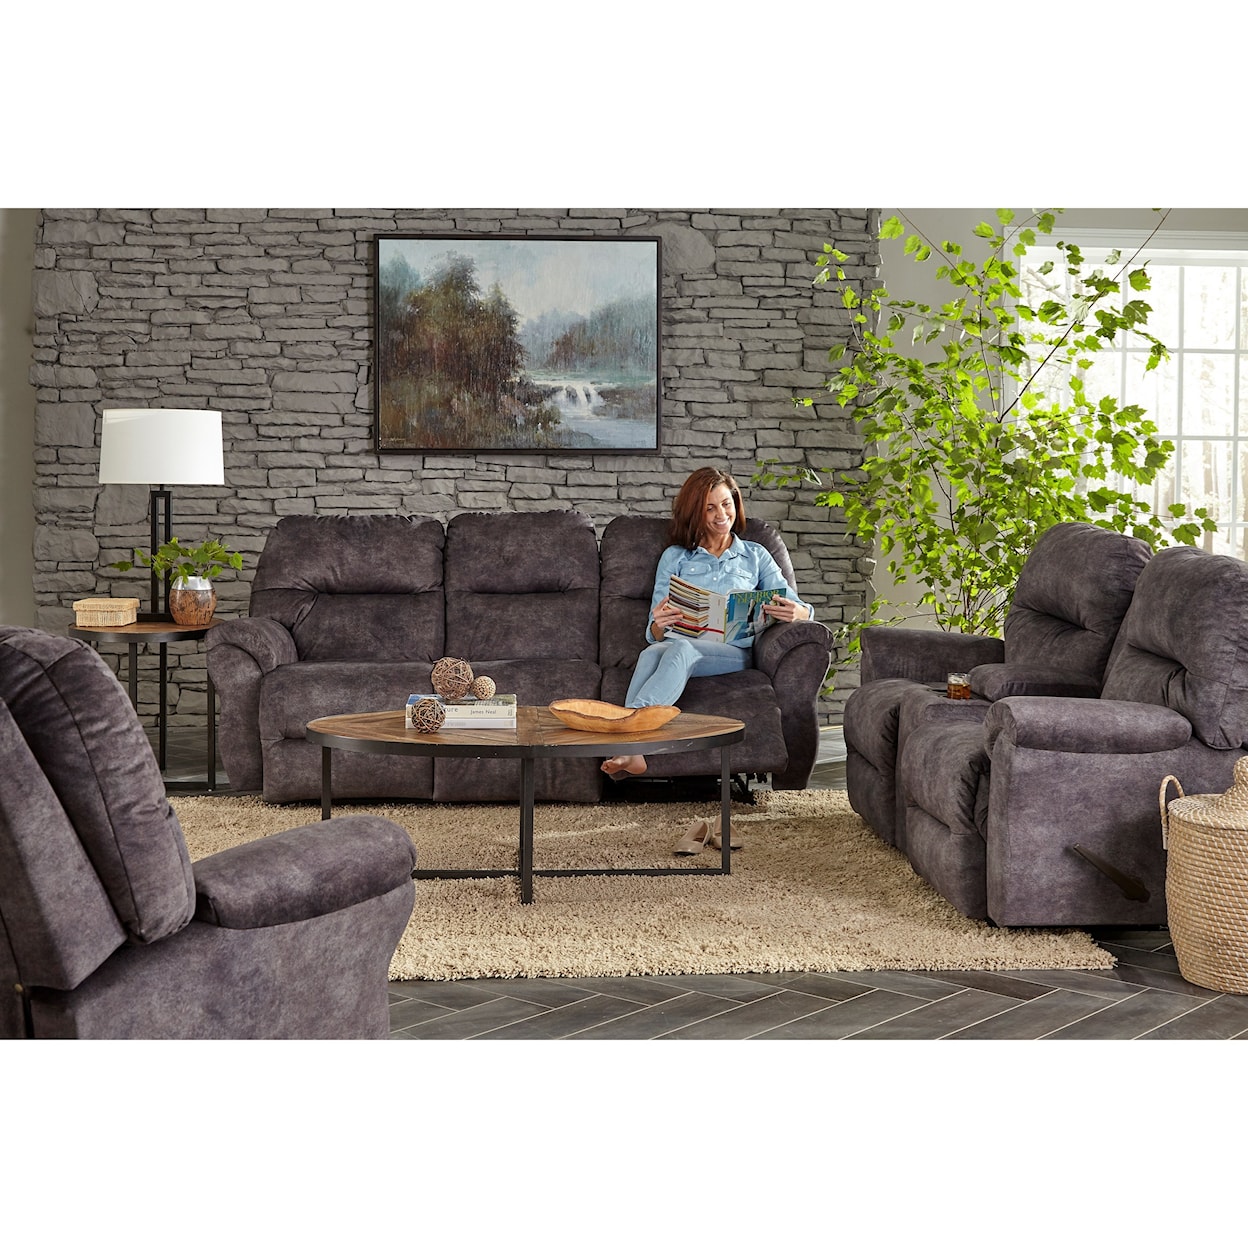 Best Home Furnishings Bodie Rocking Reclining Loveseat w/ Console